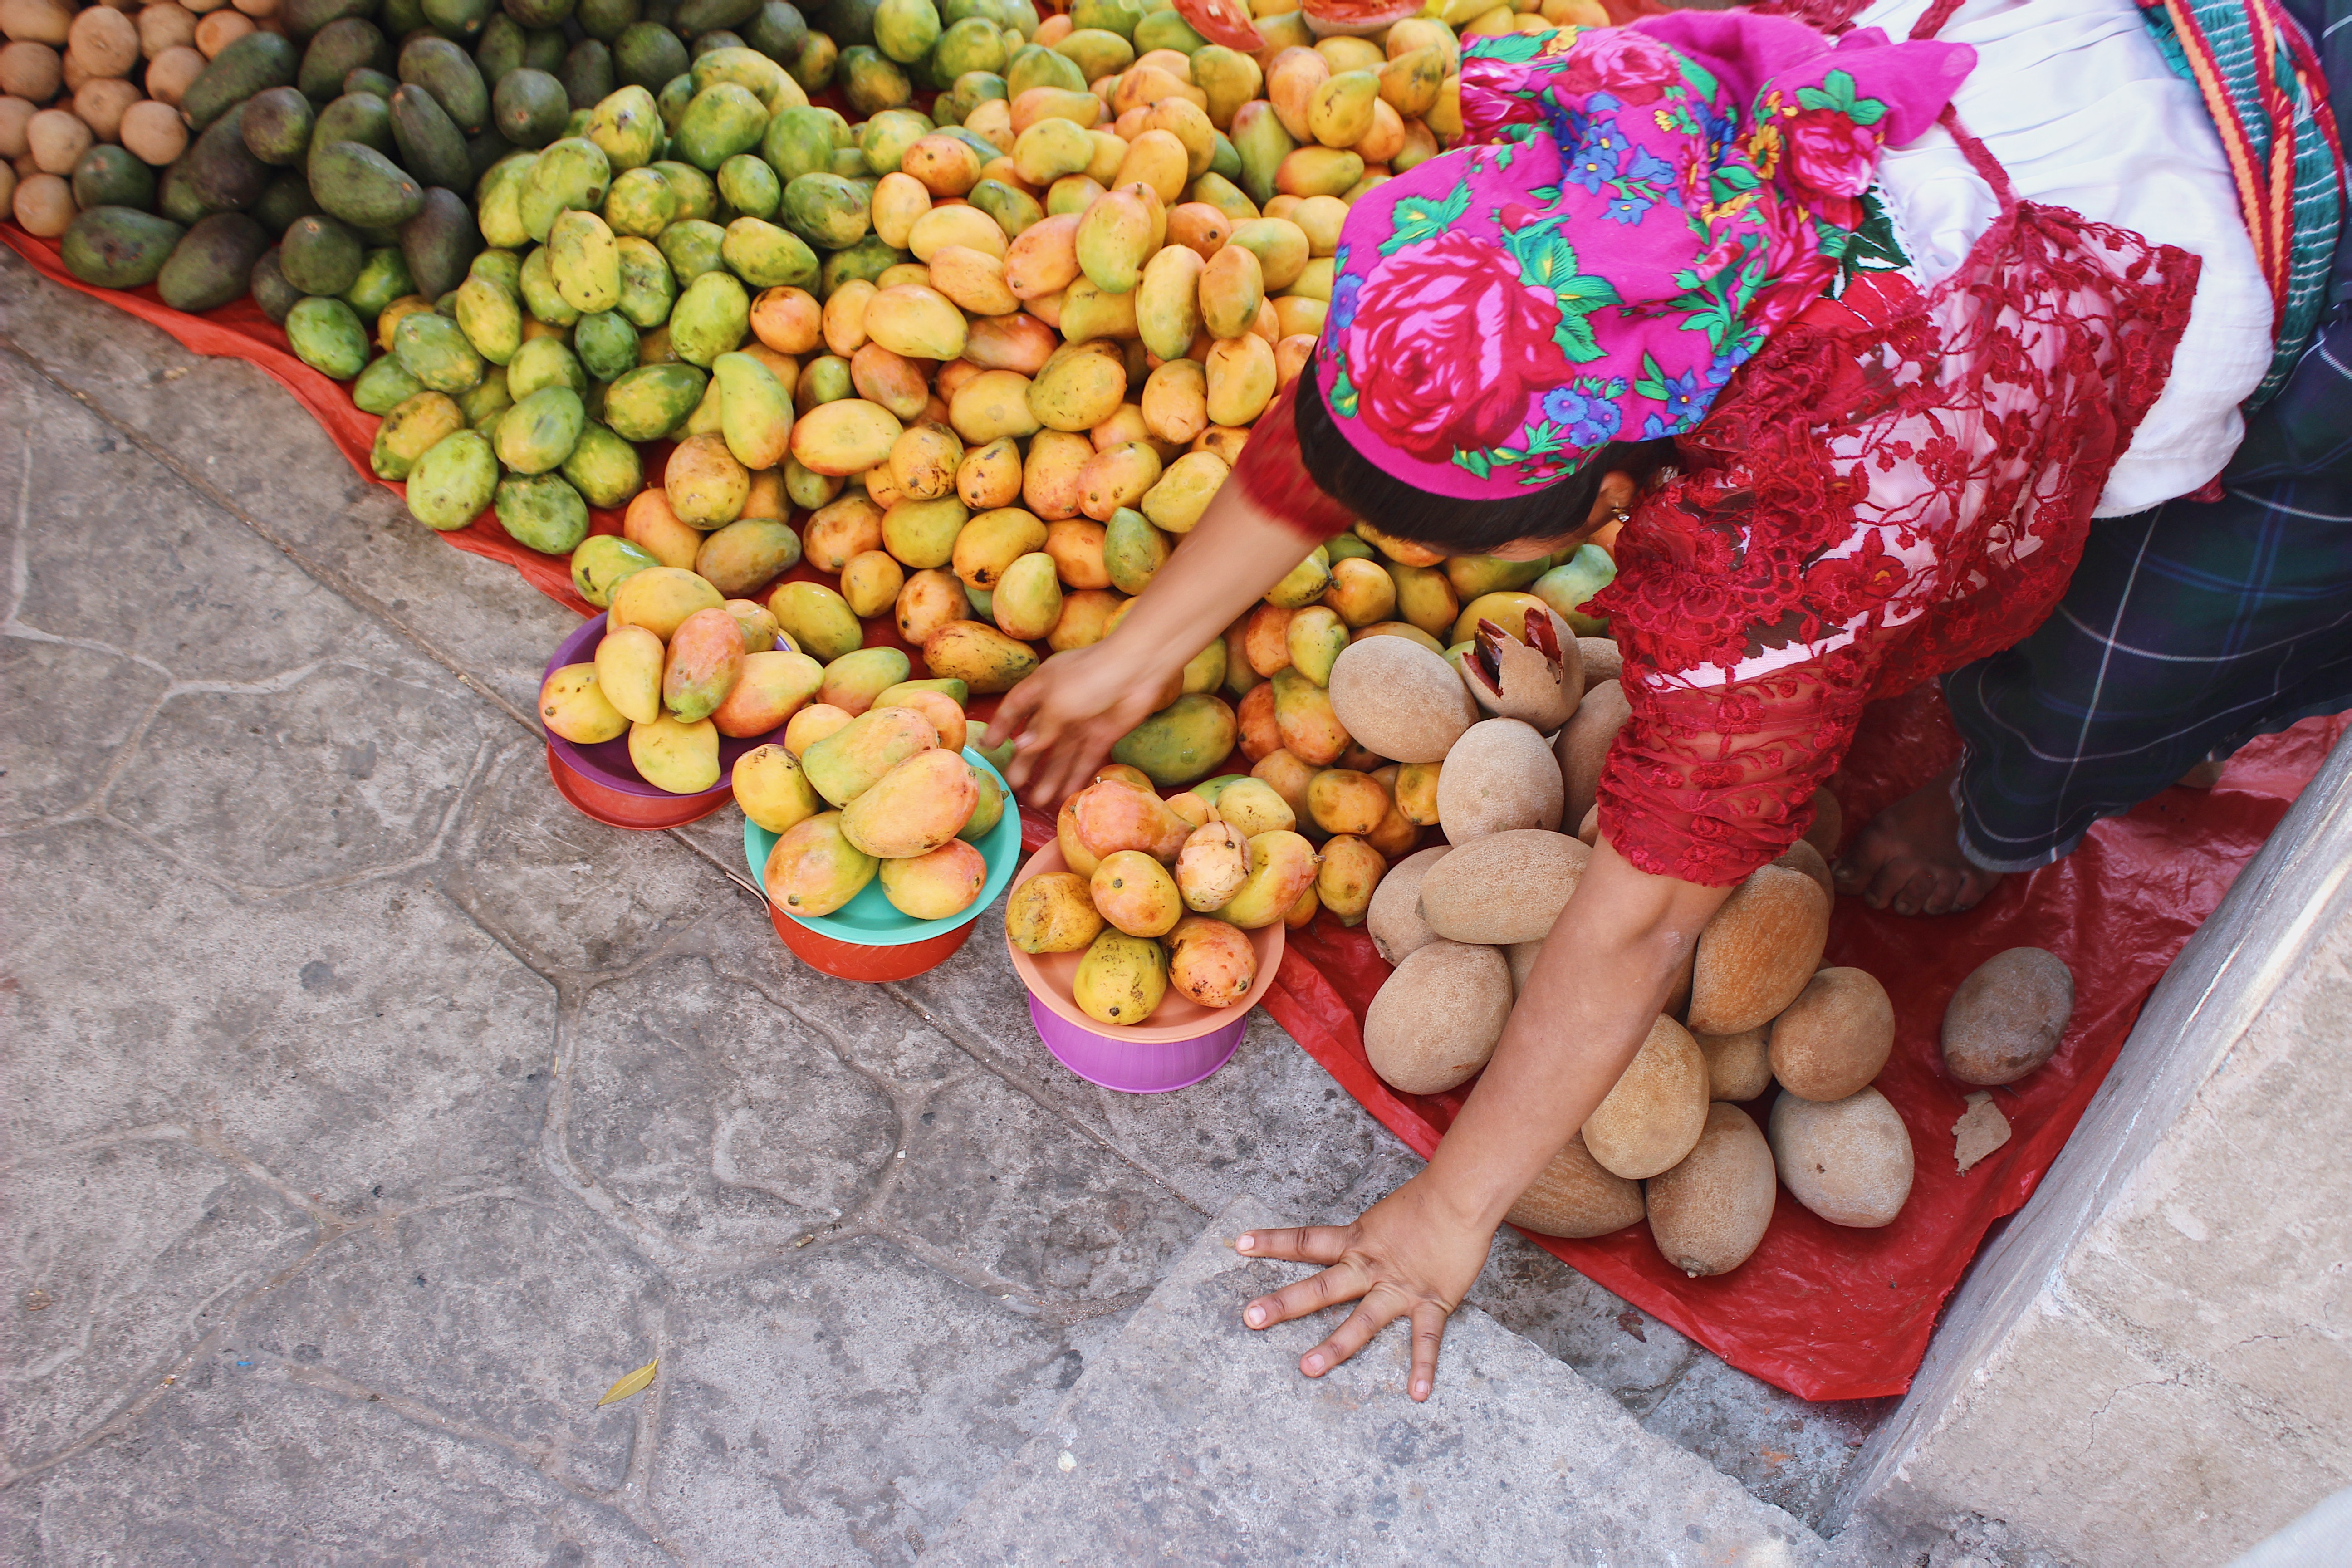 Woman wearing traditional dress sets out different varieties of mangoes on a blanket.